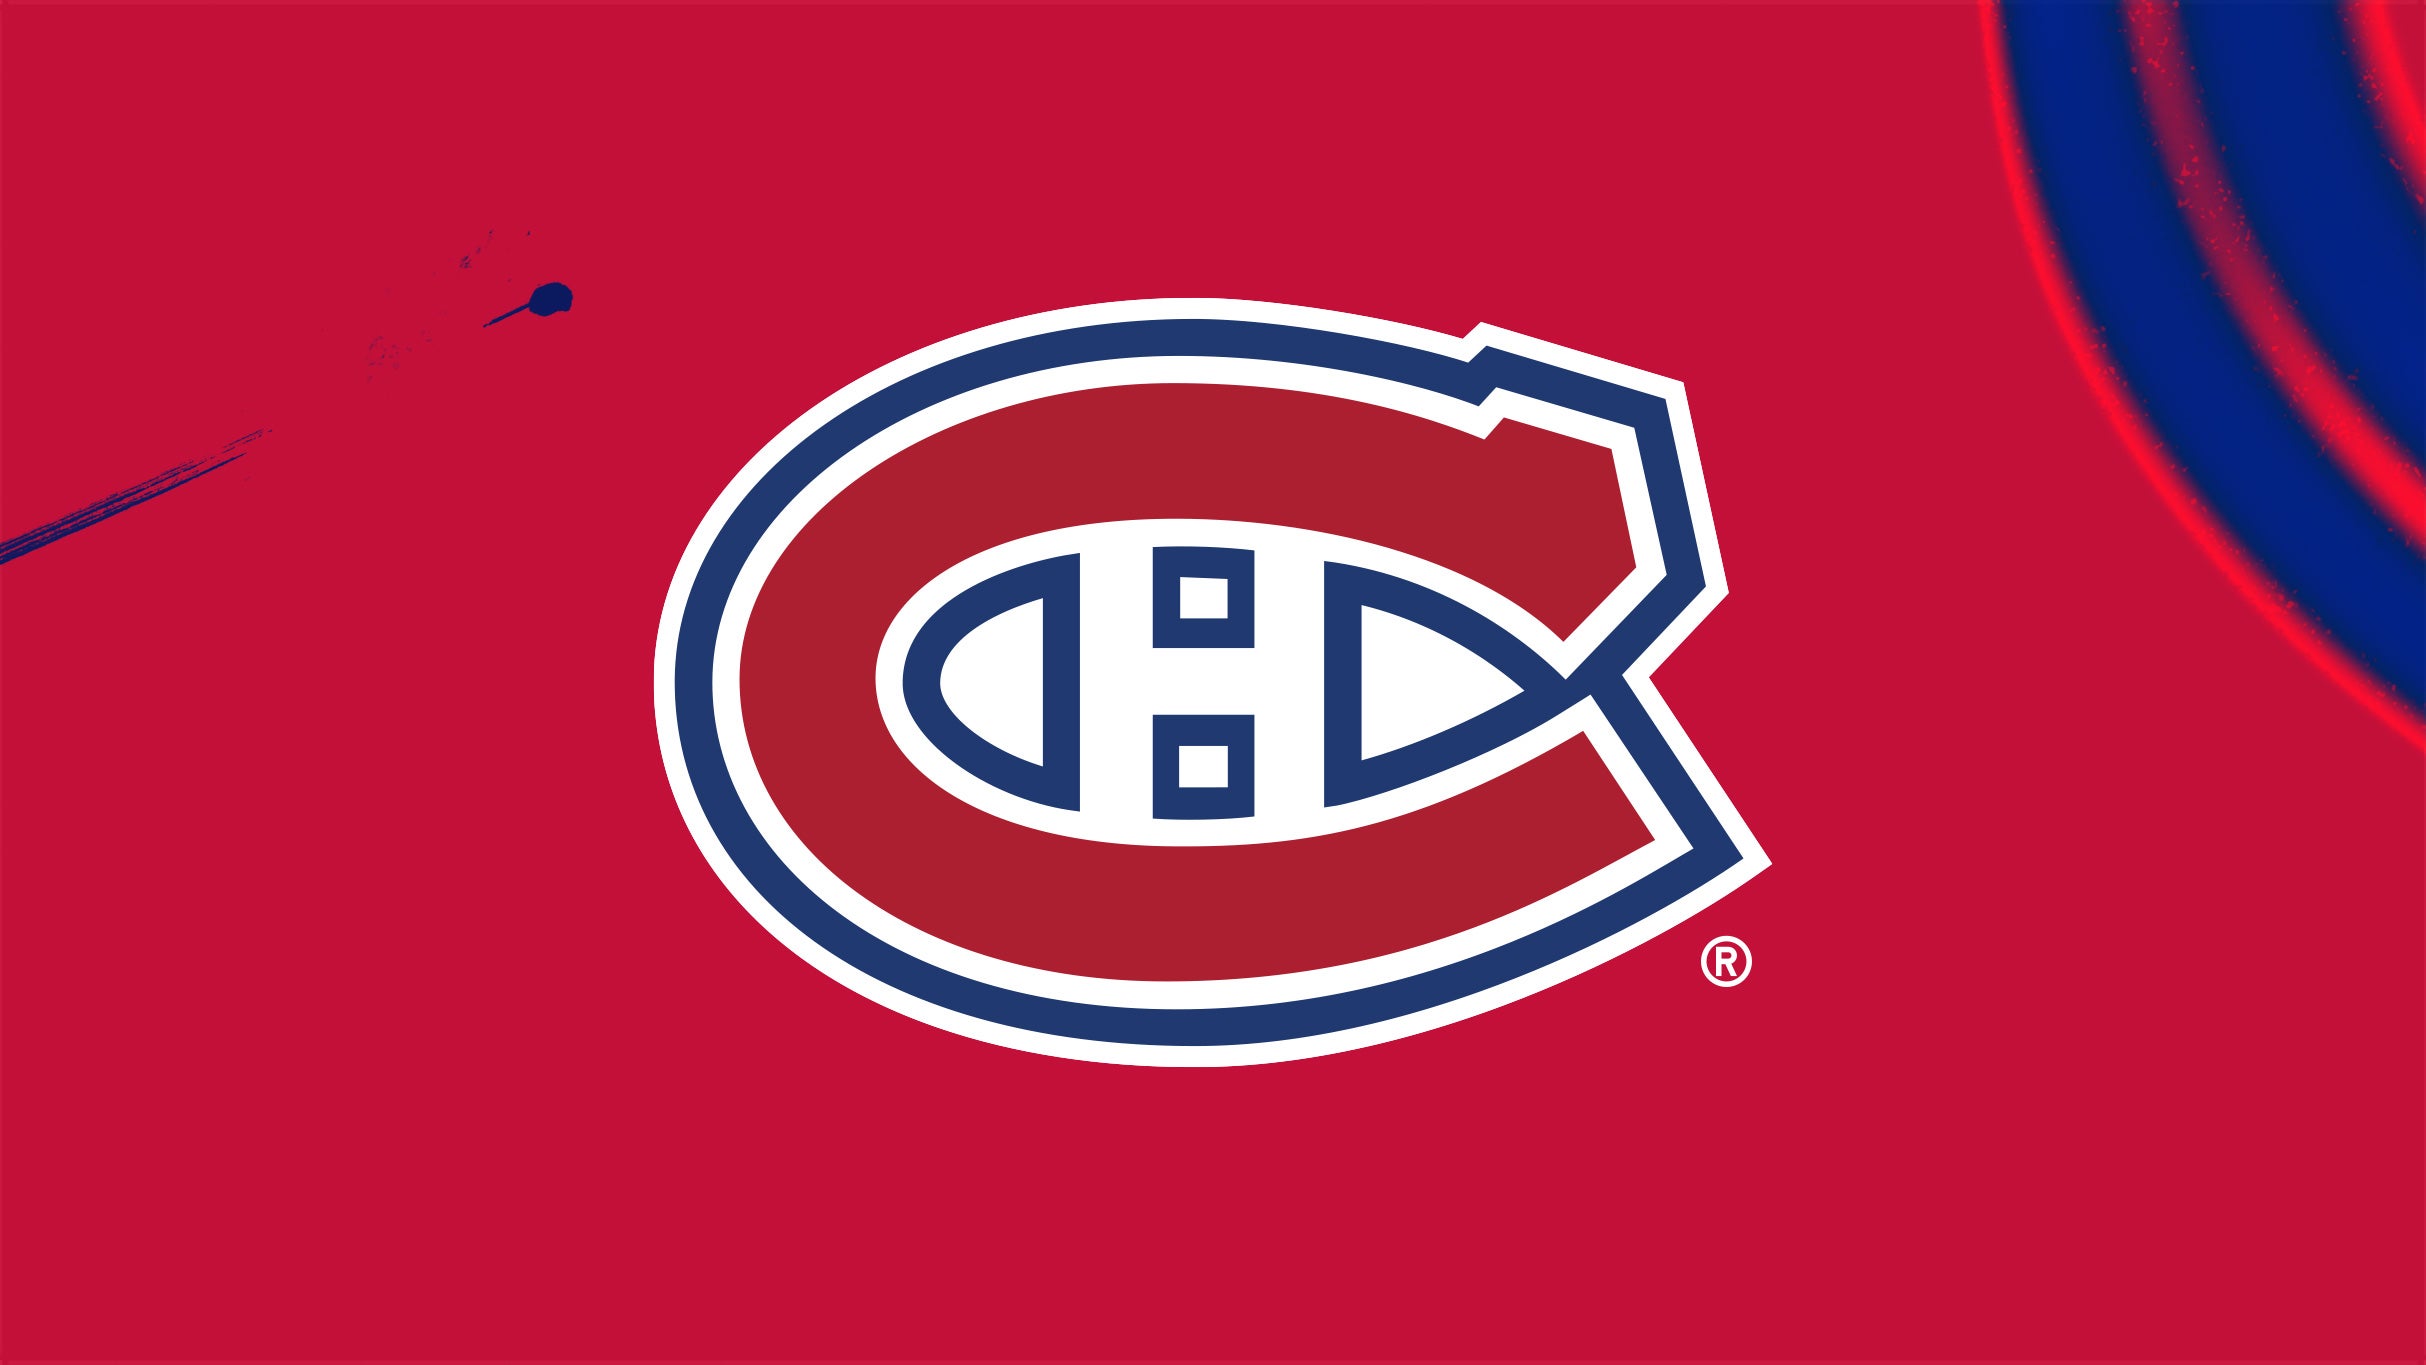 Montreal Canadiens vs. Colorado Avalanche in Montreal promo photo for Offre Argent / Silver  presale offer code